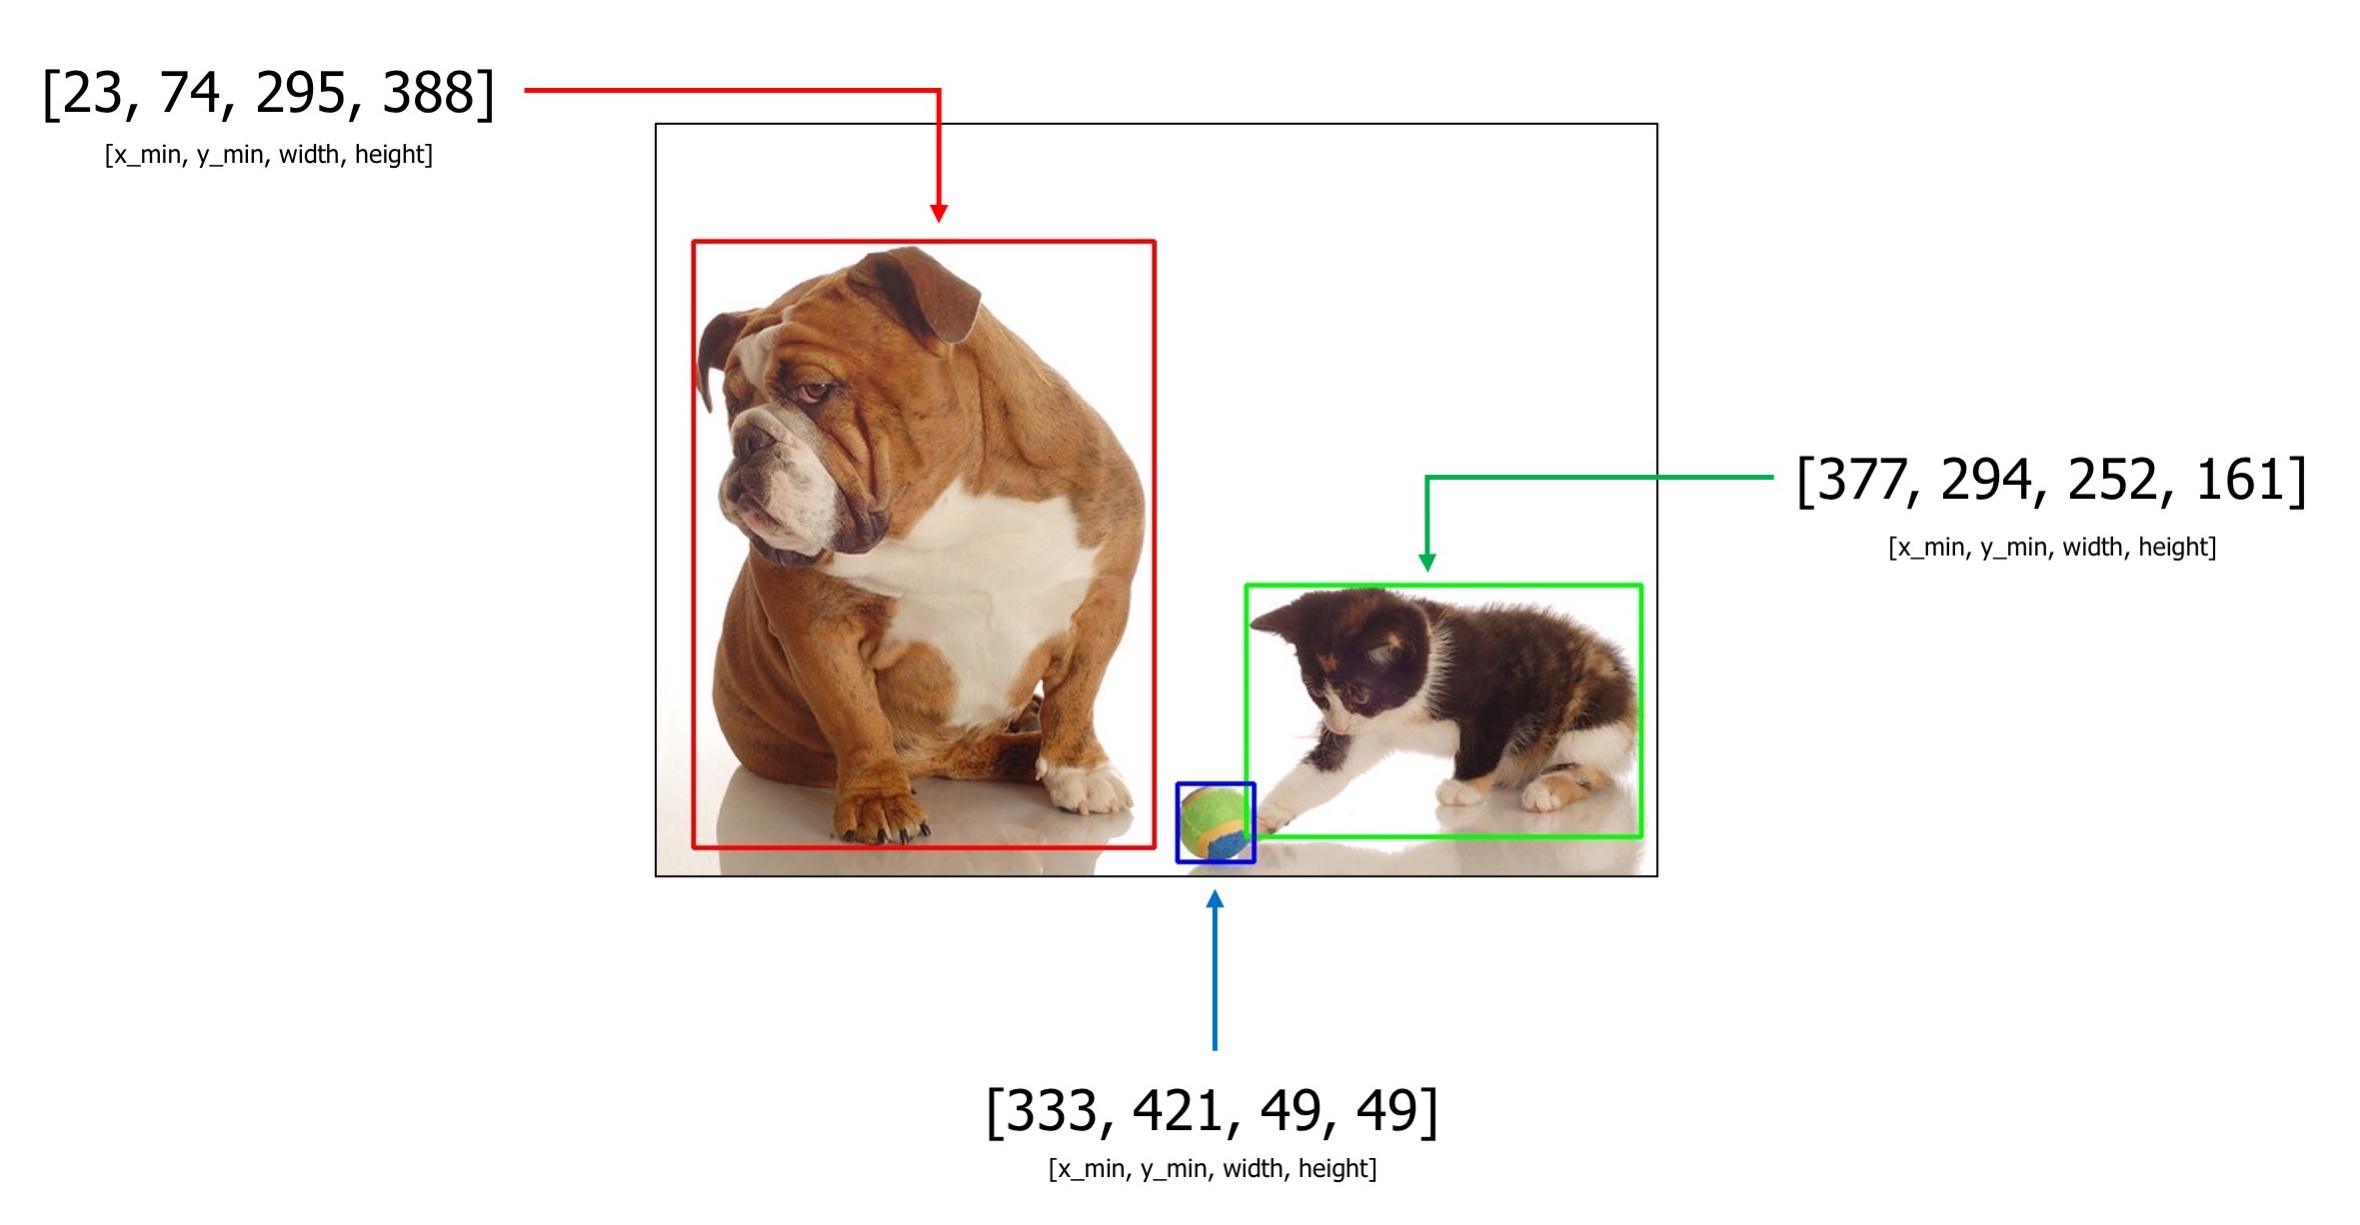 An example image with 3 bounding boxes from the COCO dataset